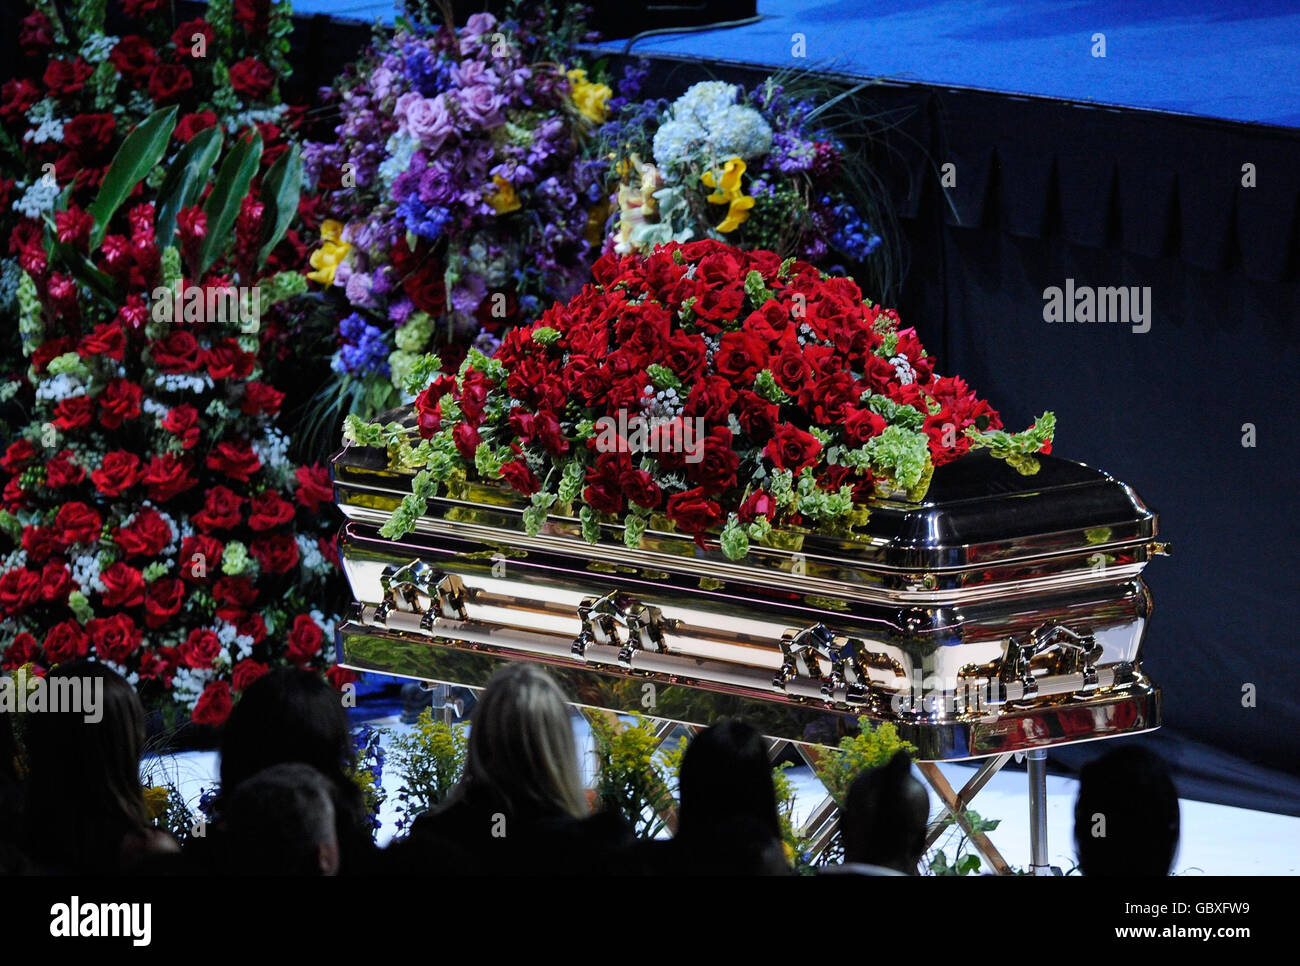 The casket is displayed during a memorial service for Michael Jackson at the Staples Center in Los Angeles. Stock Photo